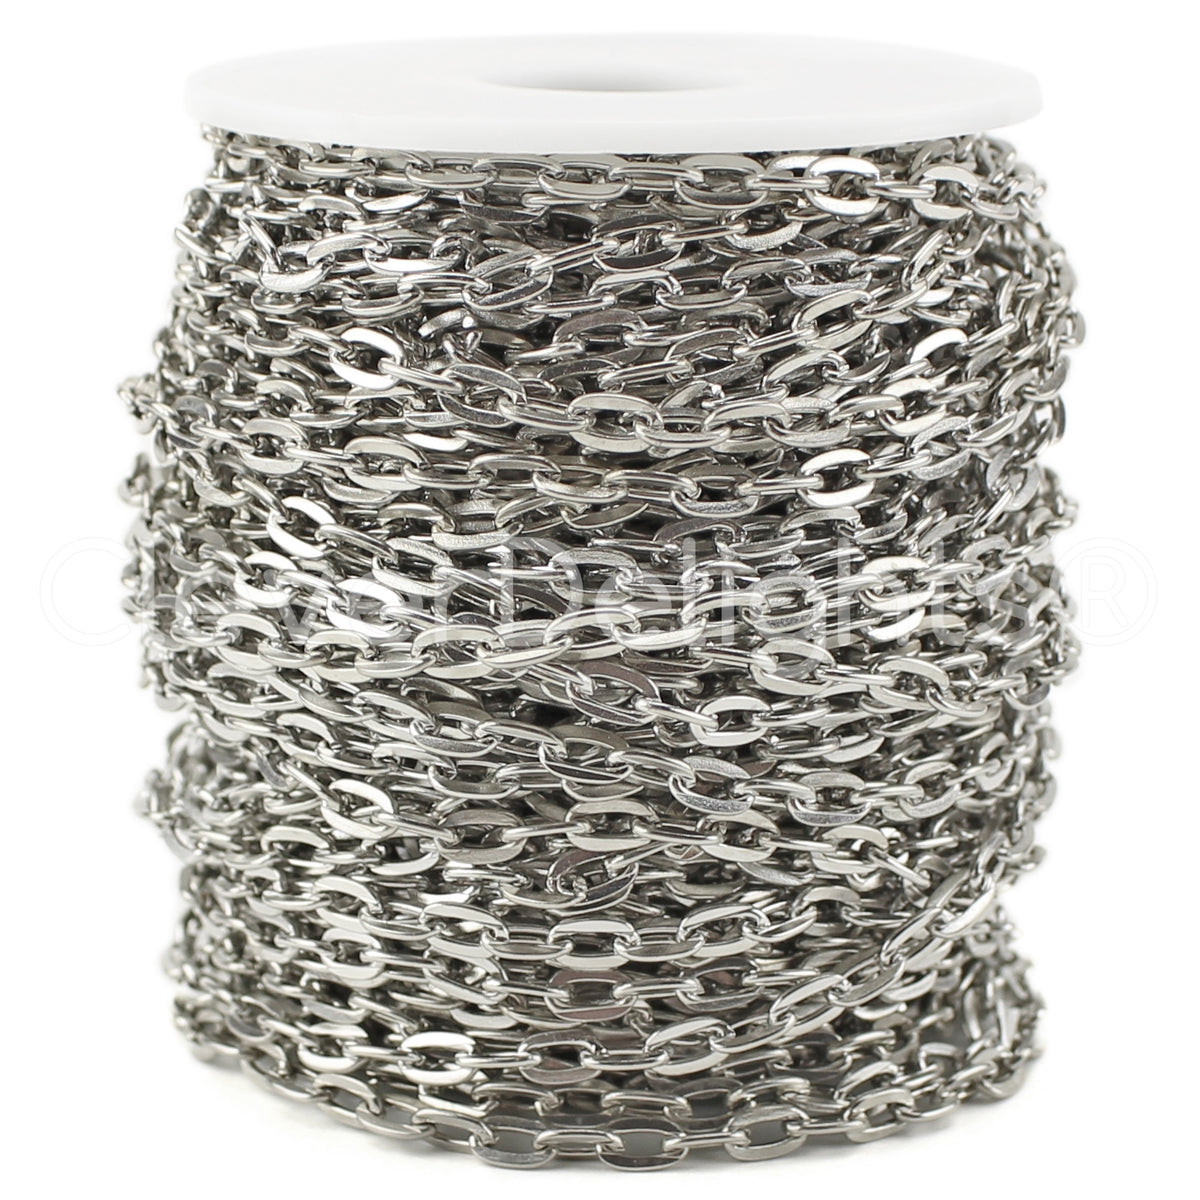 CleverDelights cleverdelights 3.75 white plastic spools - 40 pack - empty  spools - crafts thread cord wire rope chain roll